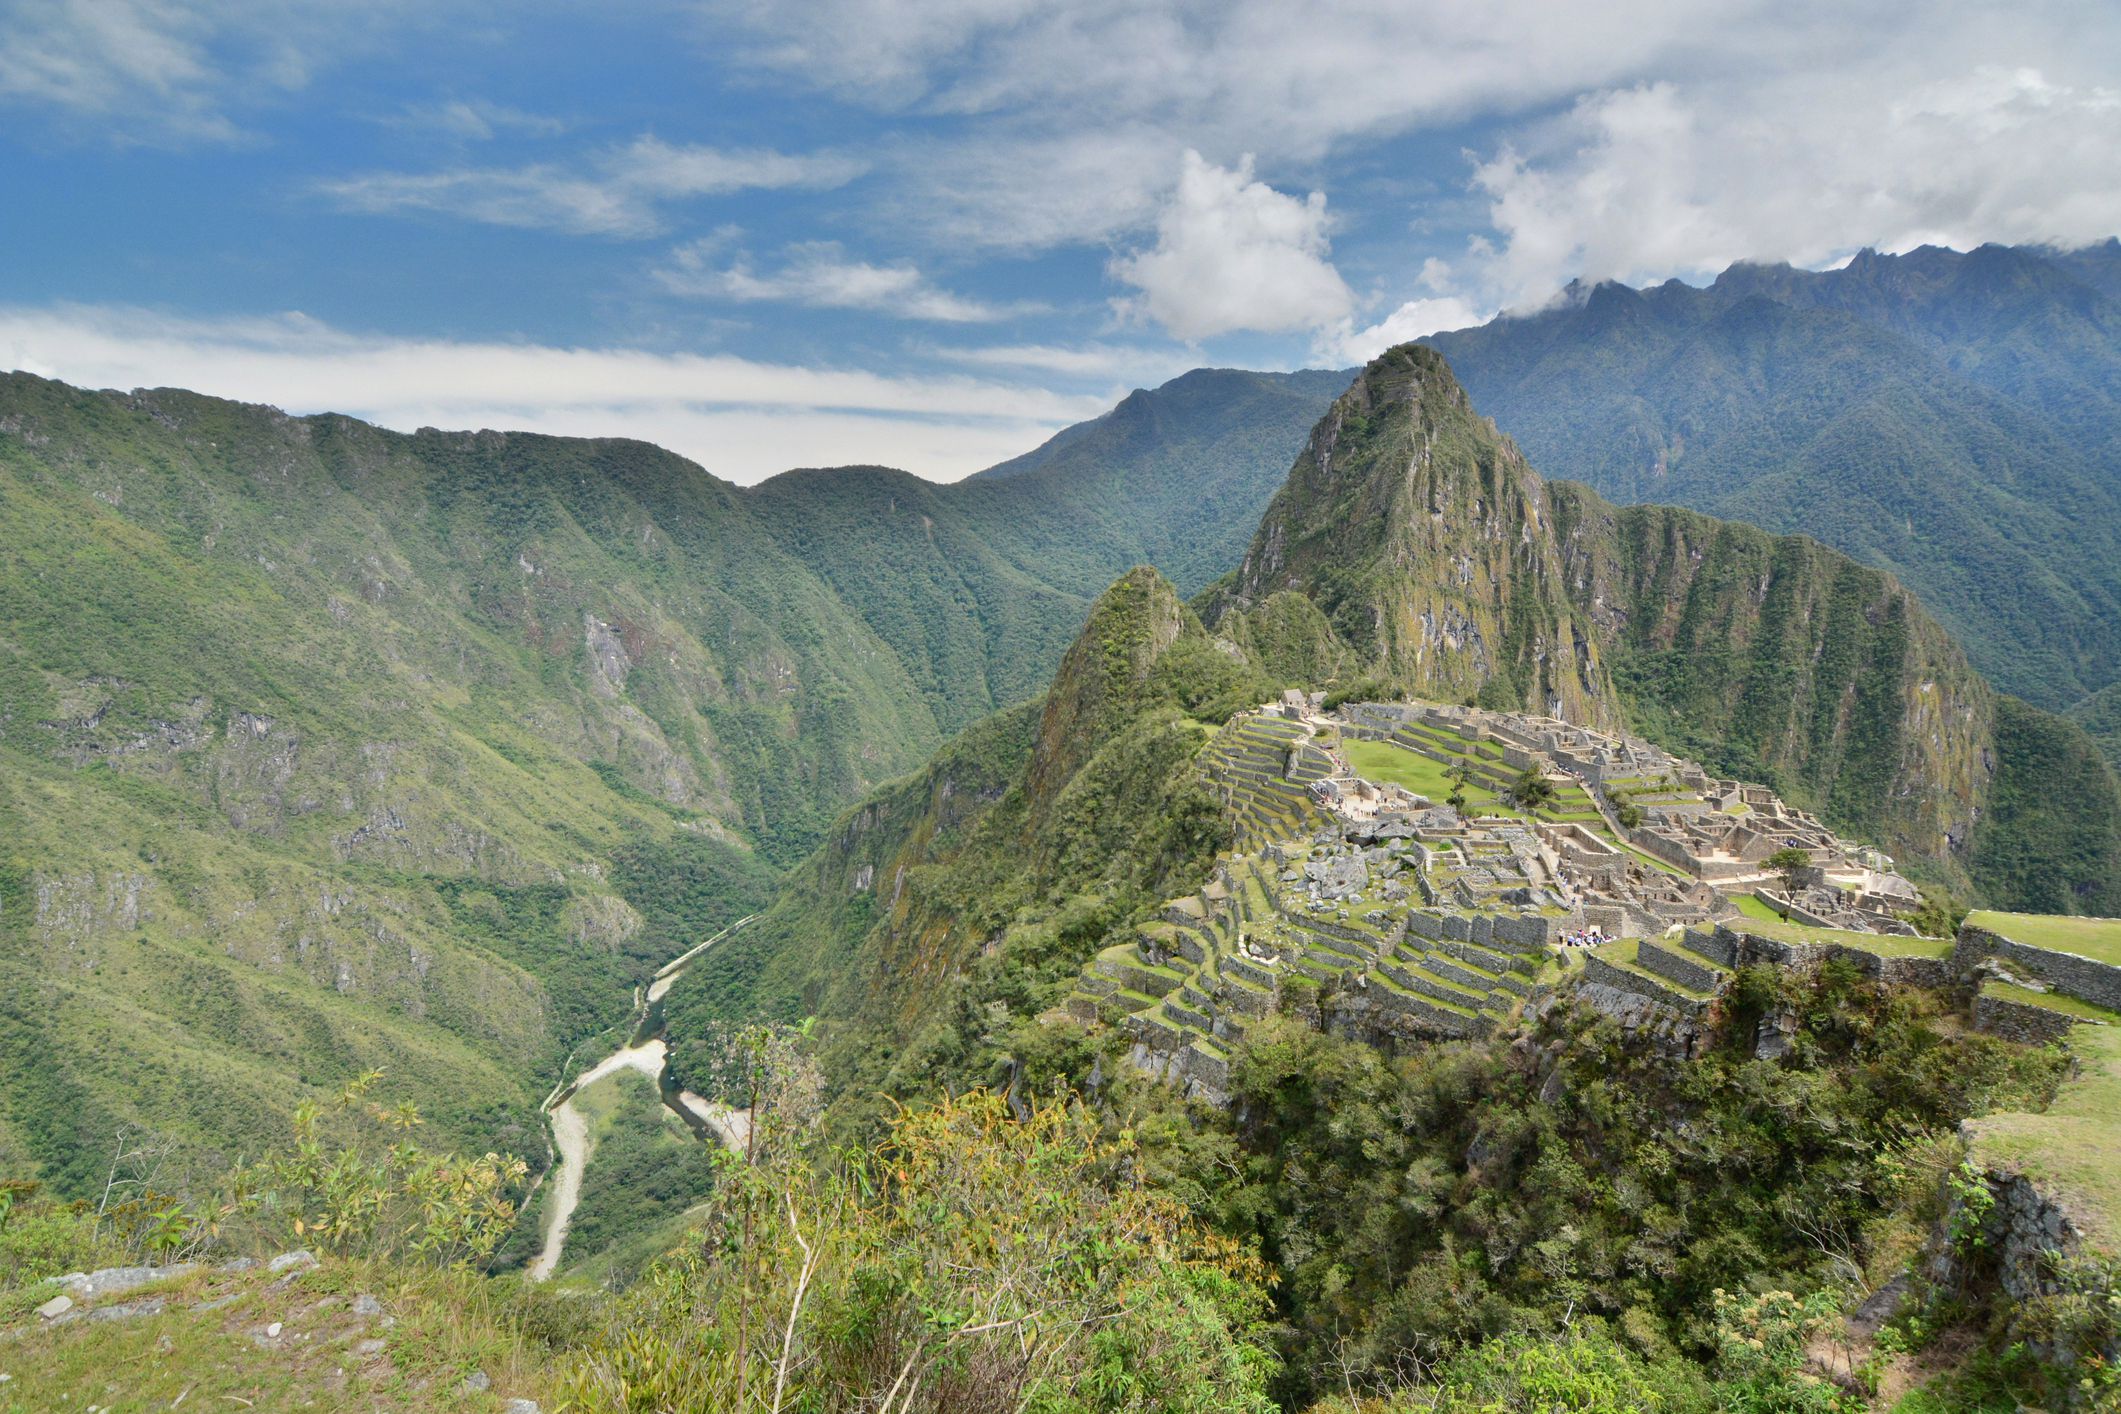 Geography of Peru's Coast, Mountains, and Jungle